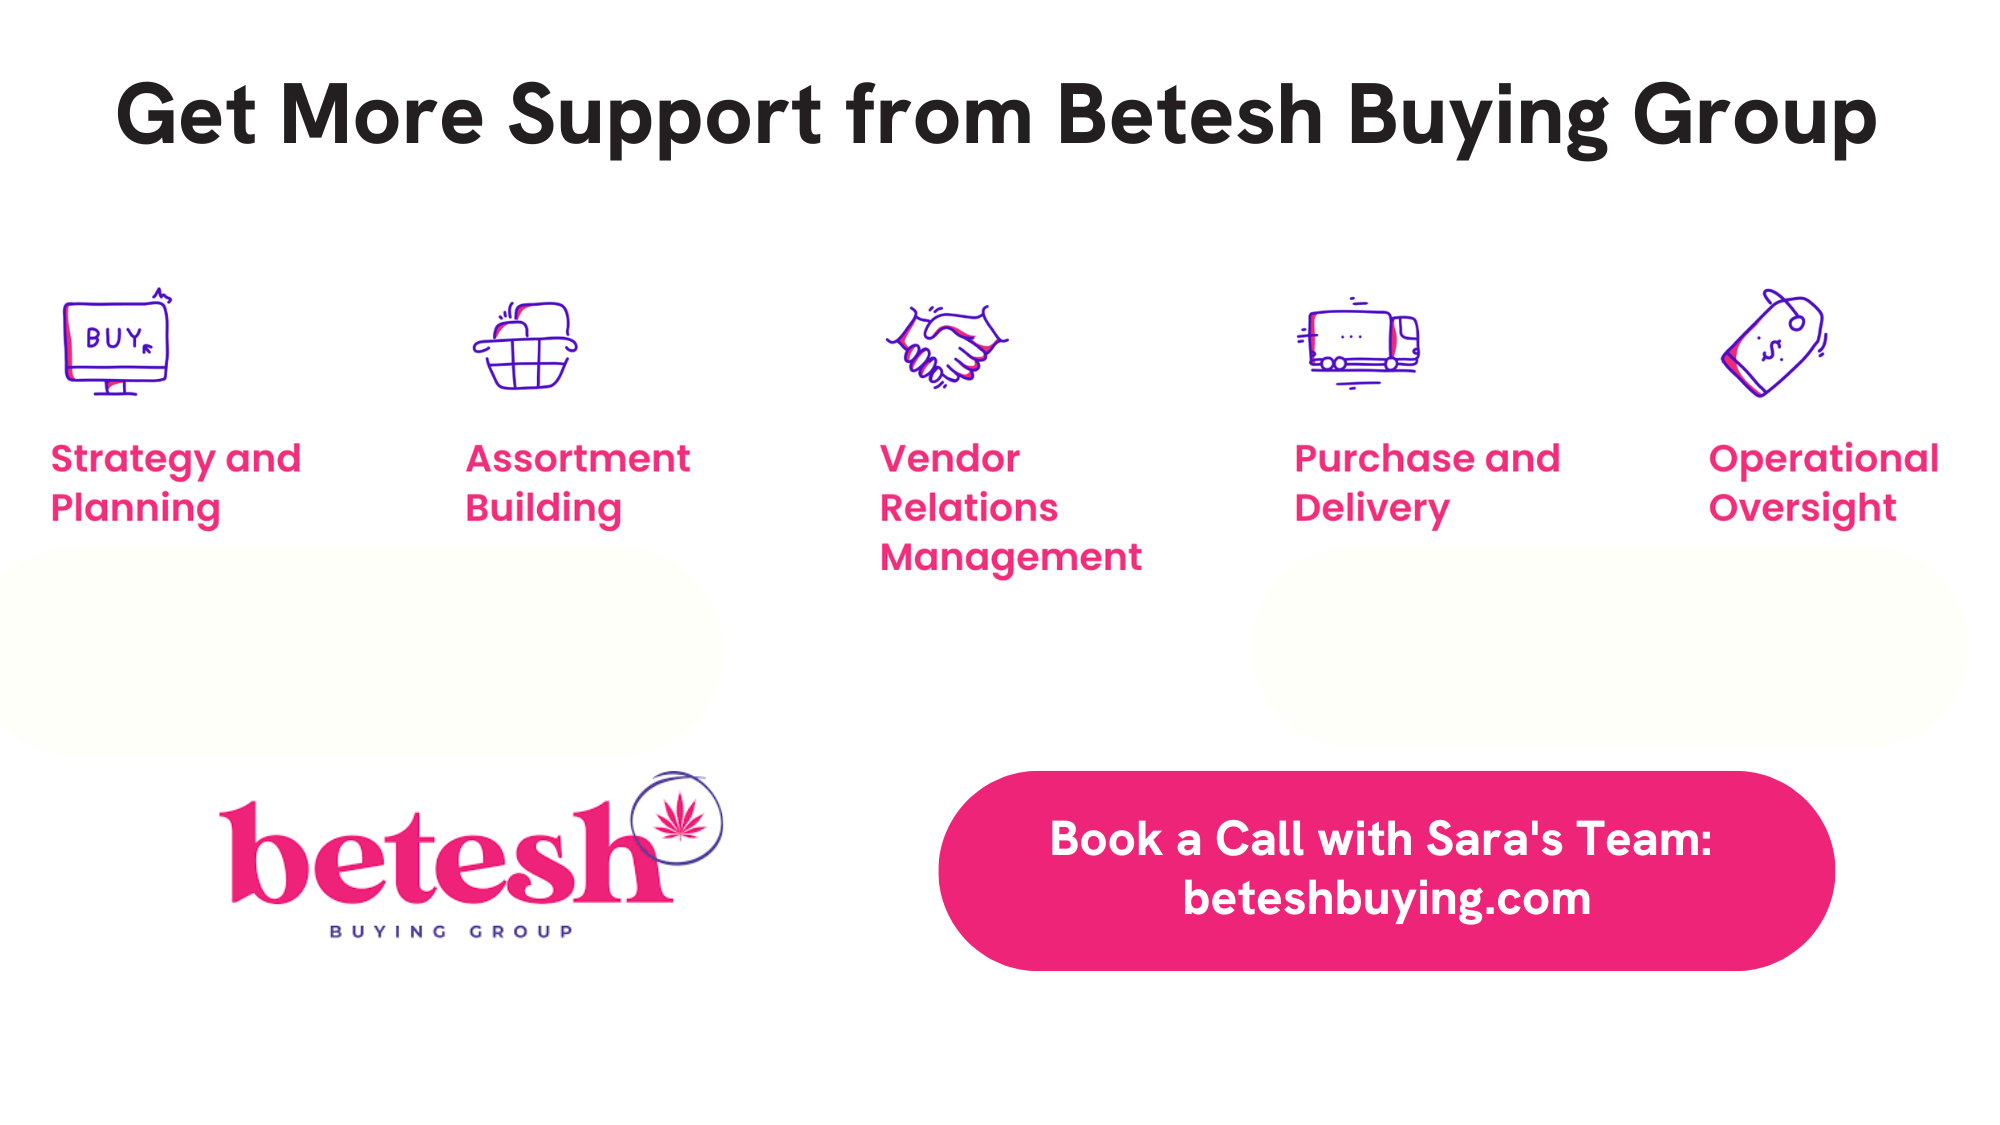 Seasonal Marketing & Buying Best Practices from Betesh Buying Group